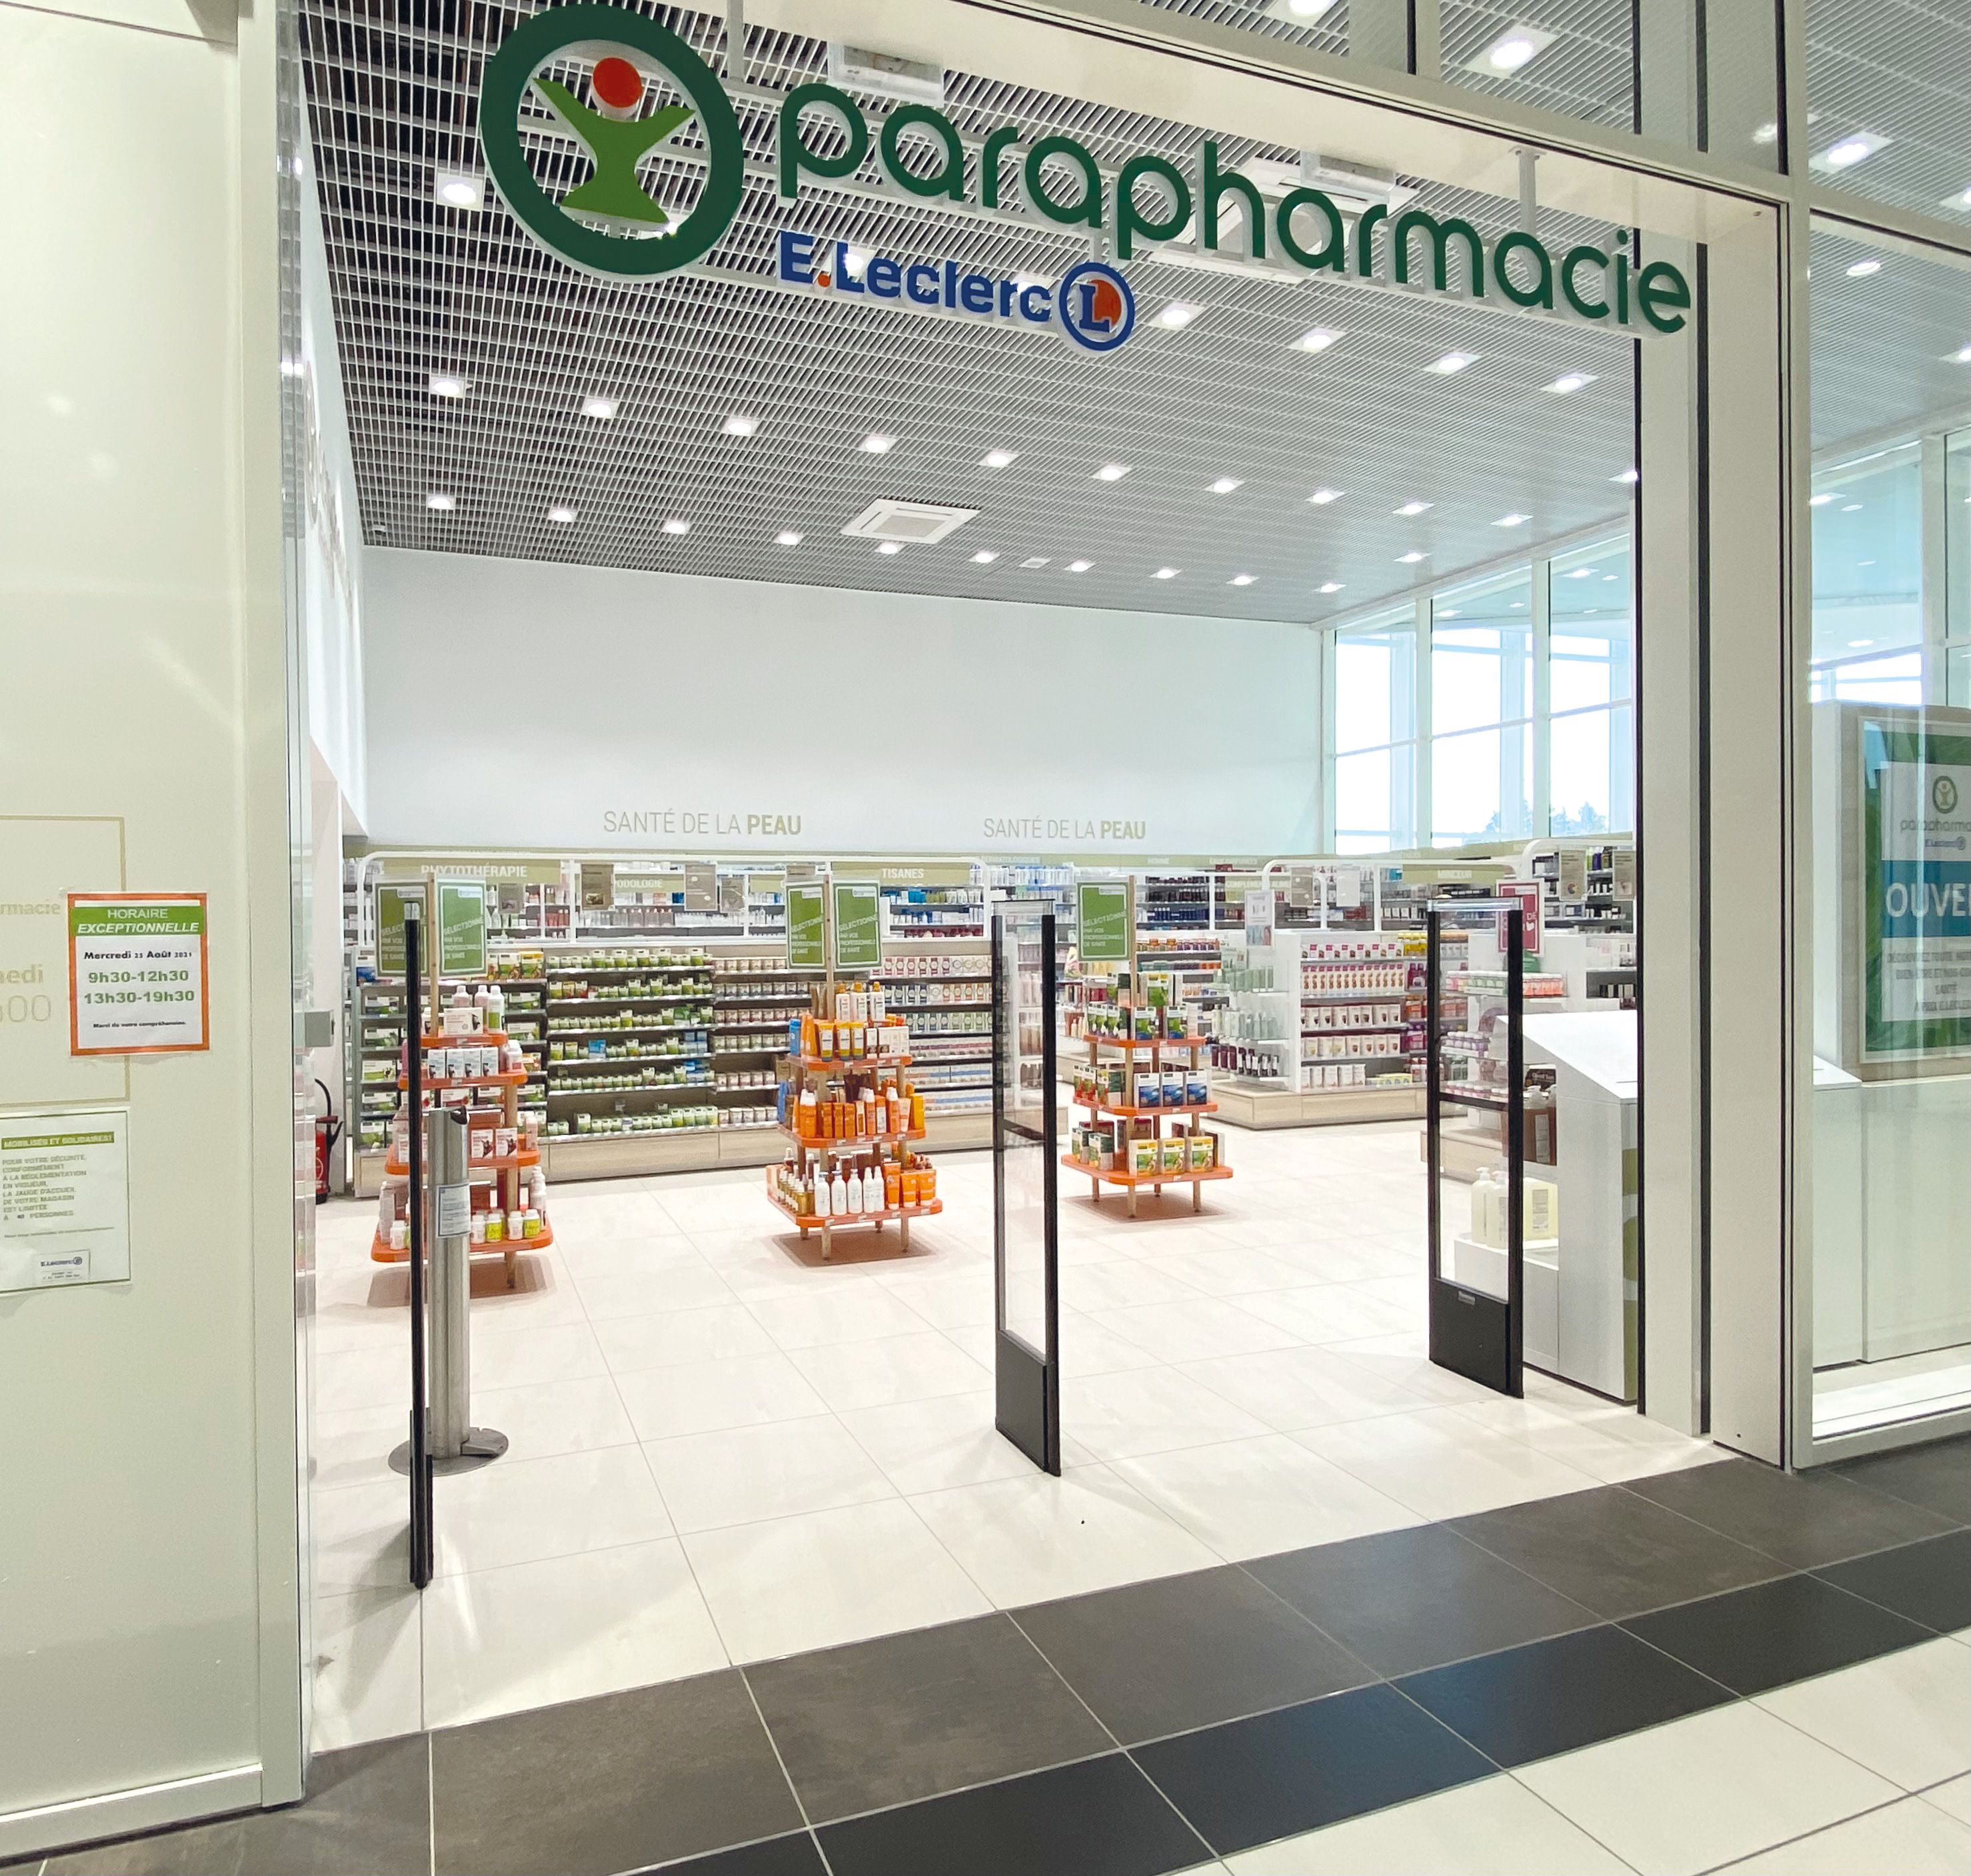 The parapharmacy concept installed in AM technology.